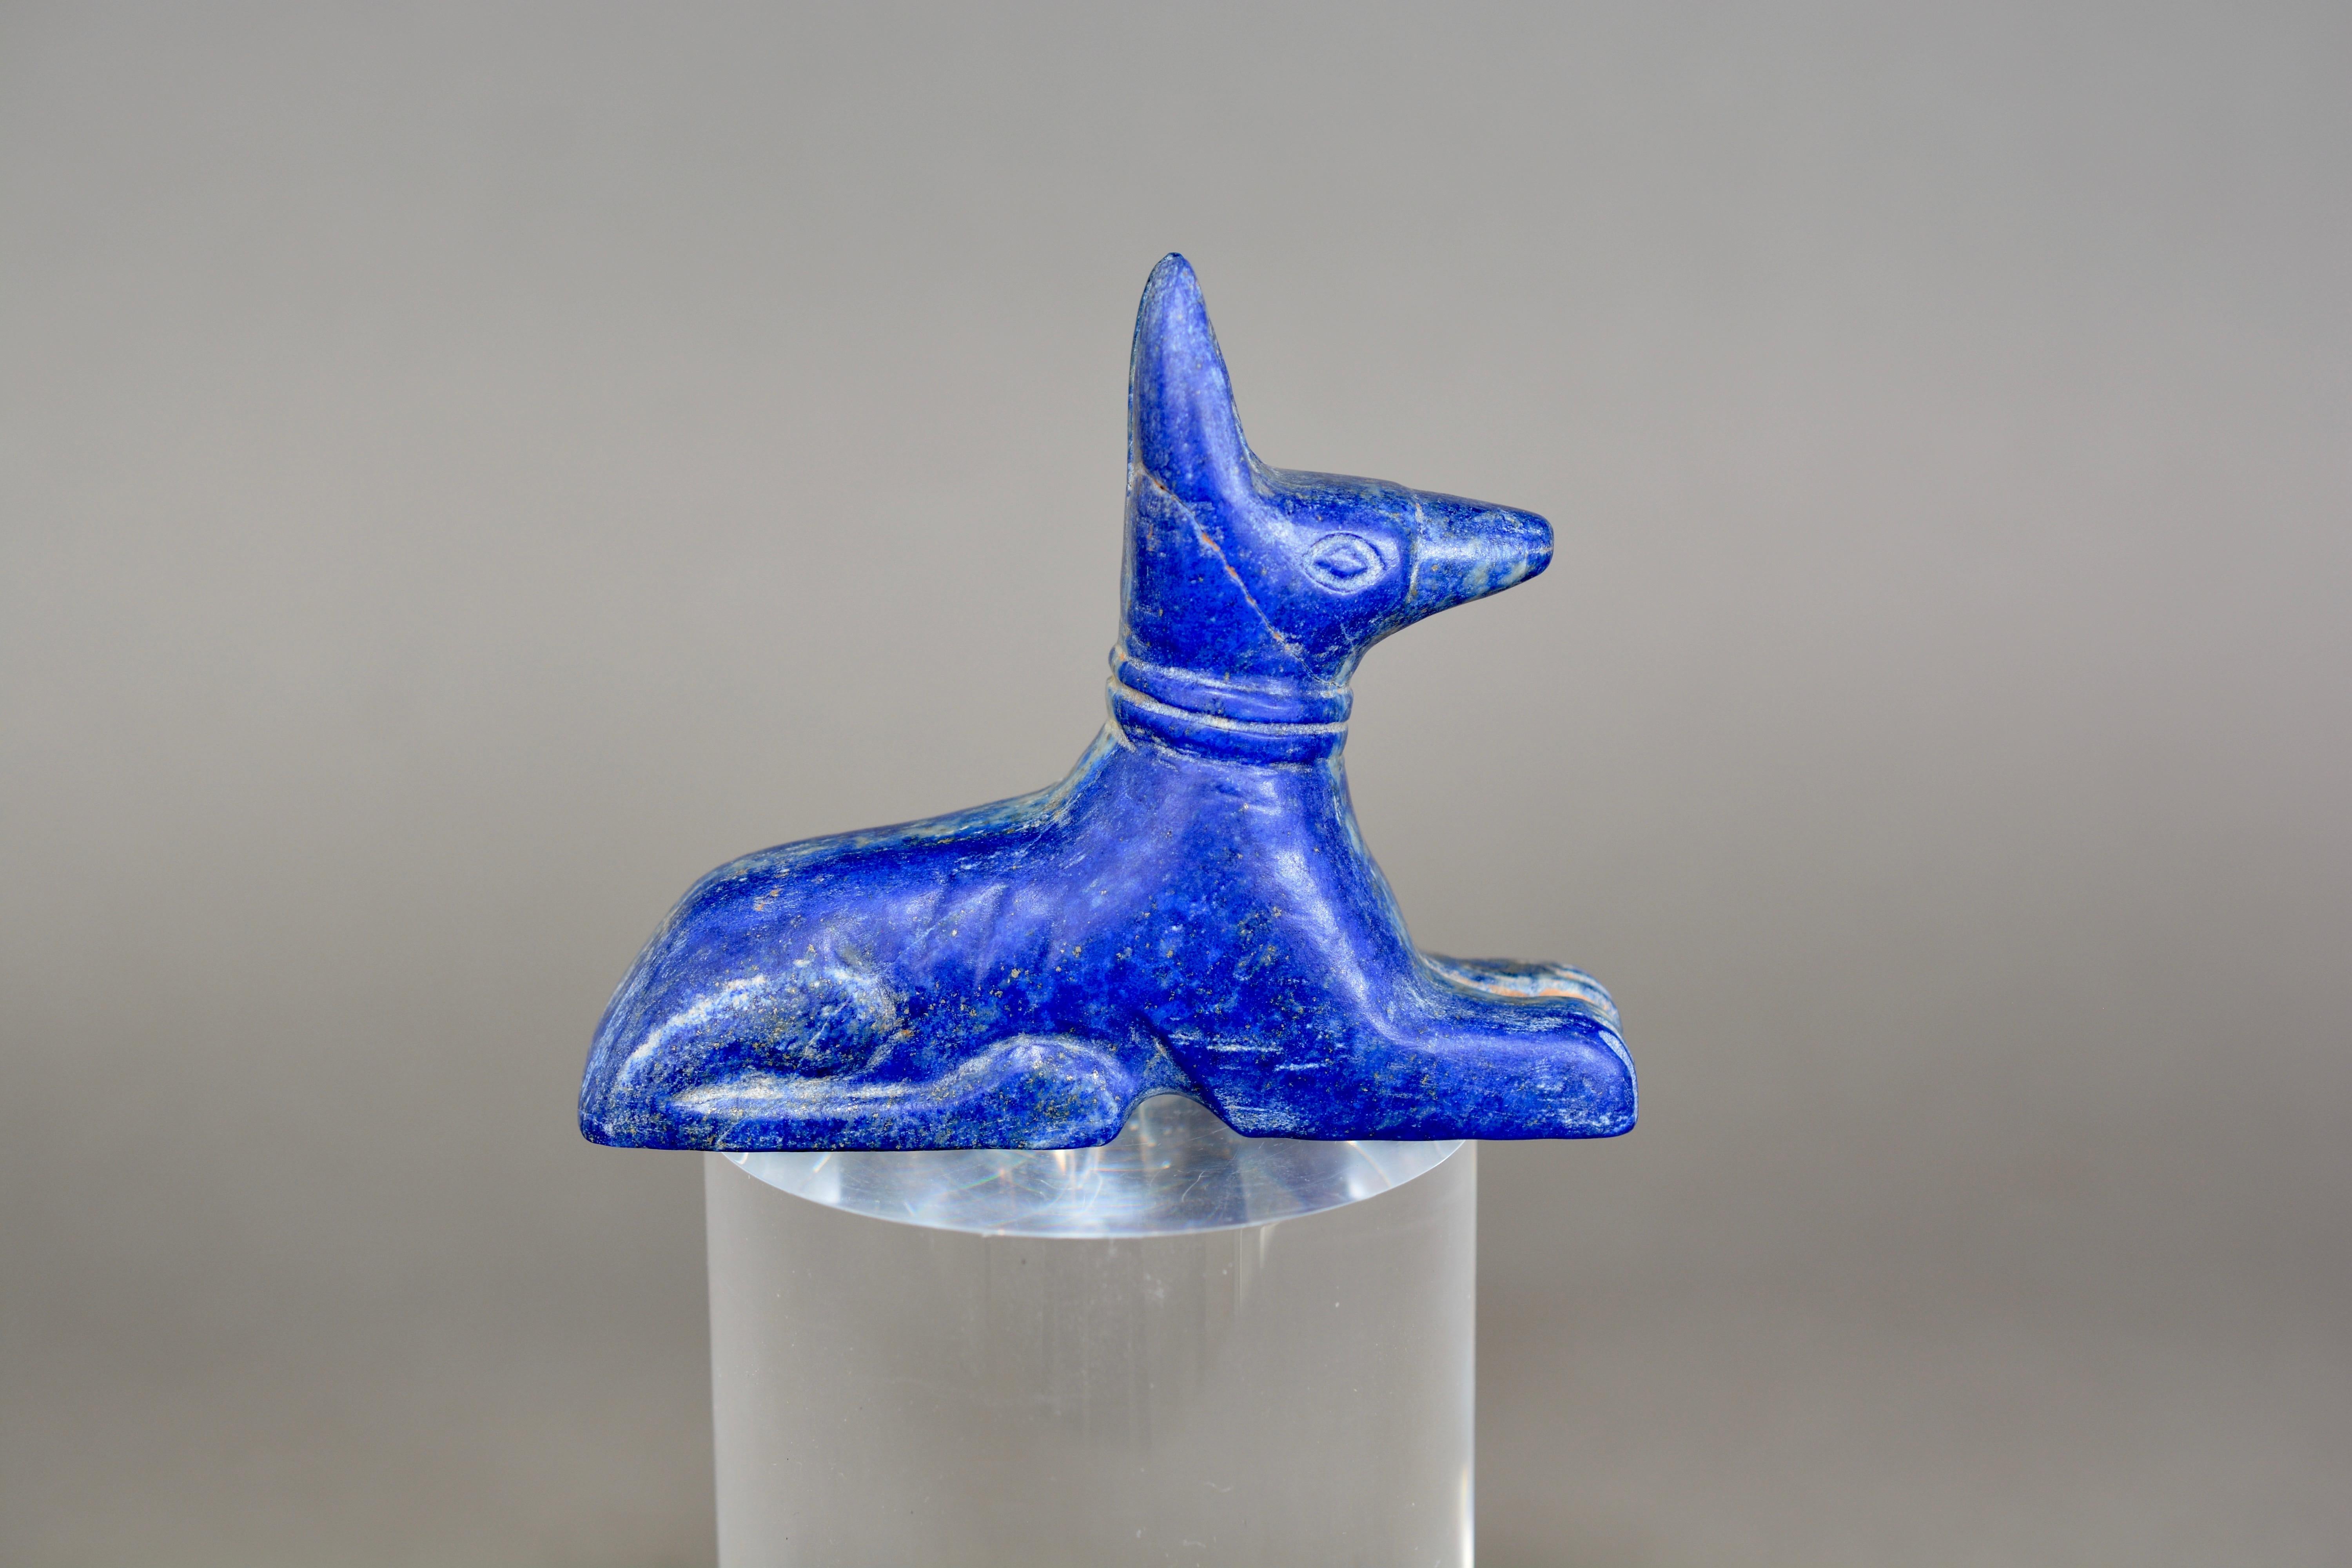 A good antique grand tour Anubis figure. Hand carved from the semi precious stone Lapis Lazuli and dating from circa.1900-1920. A wonderful tactile object. Measures: 8.7cms long, 2.5cms wide and 7cms tall.

Anubis, also called Anpu, ancient